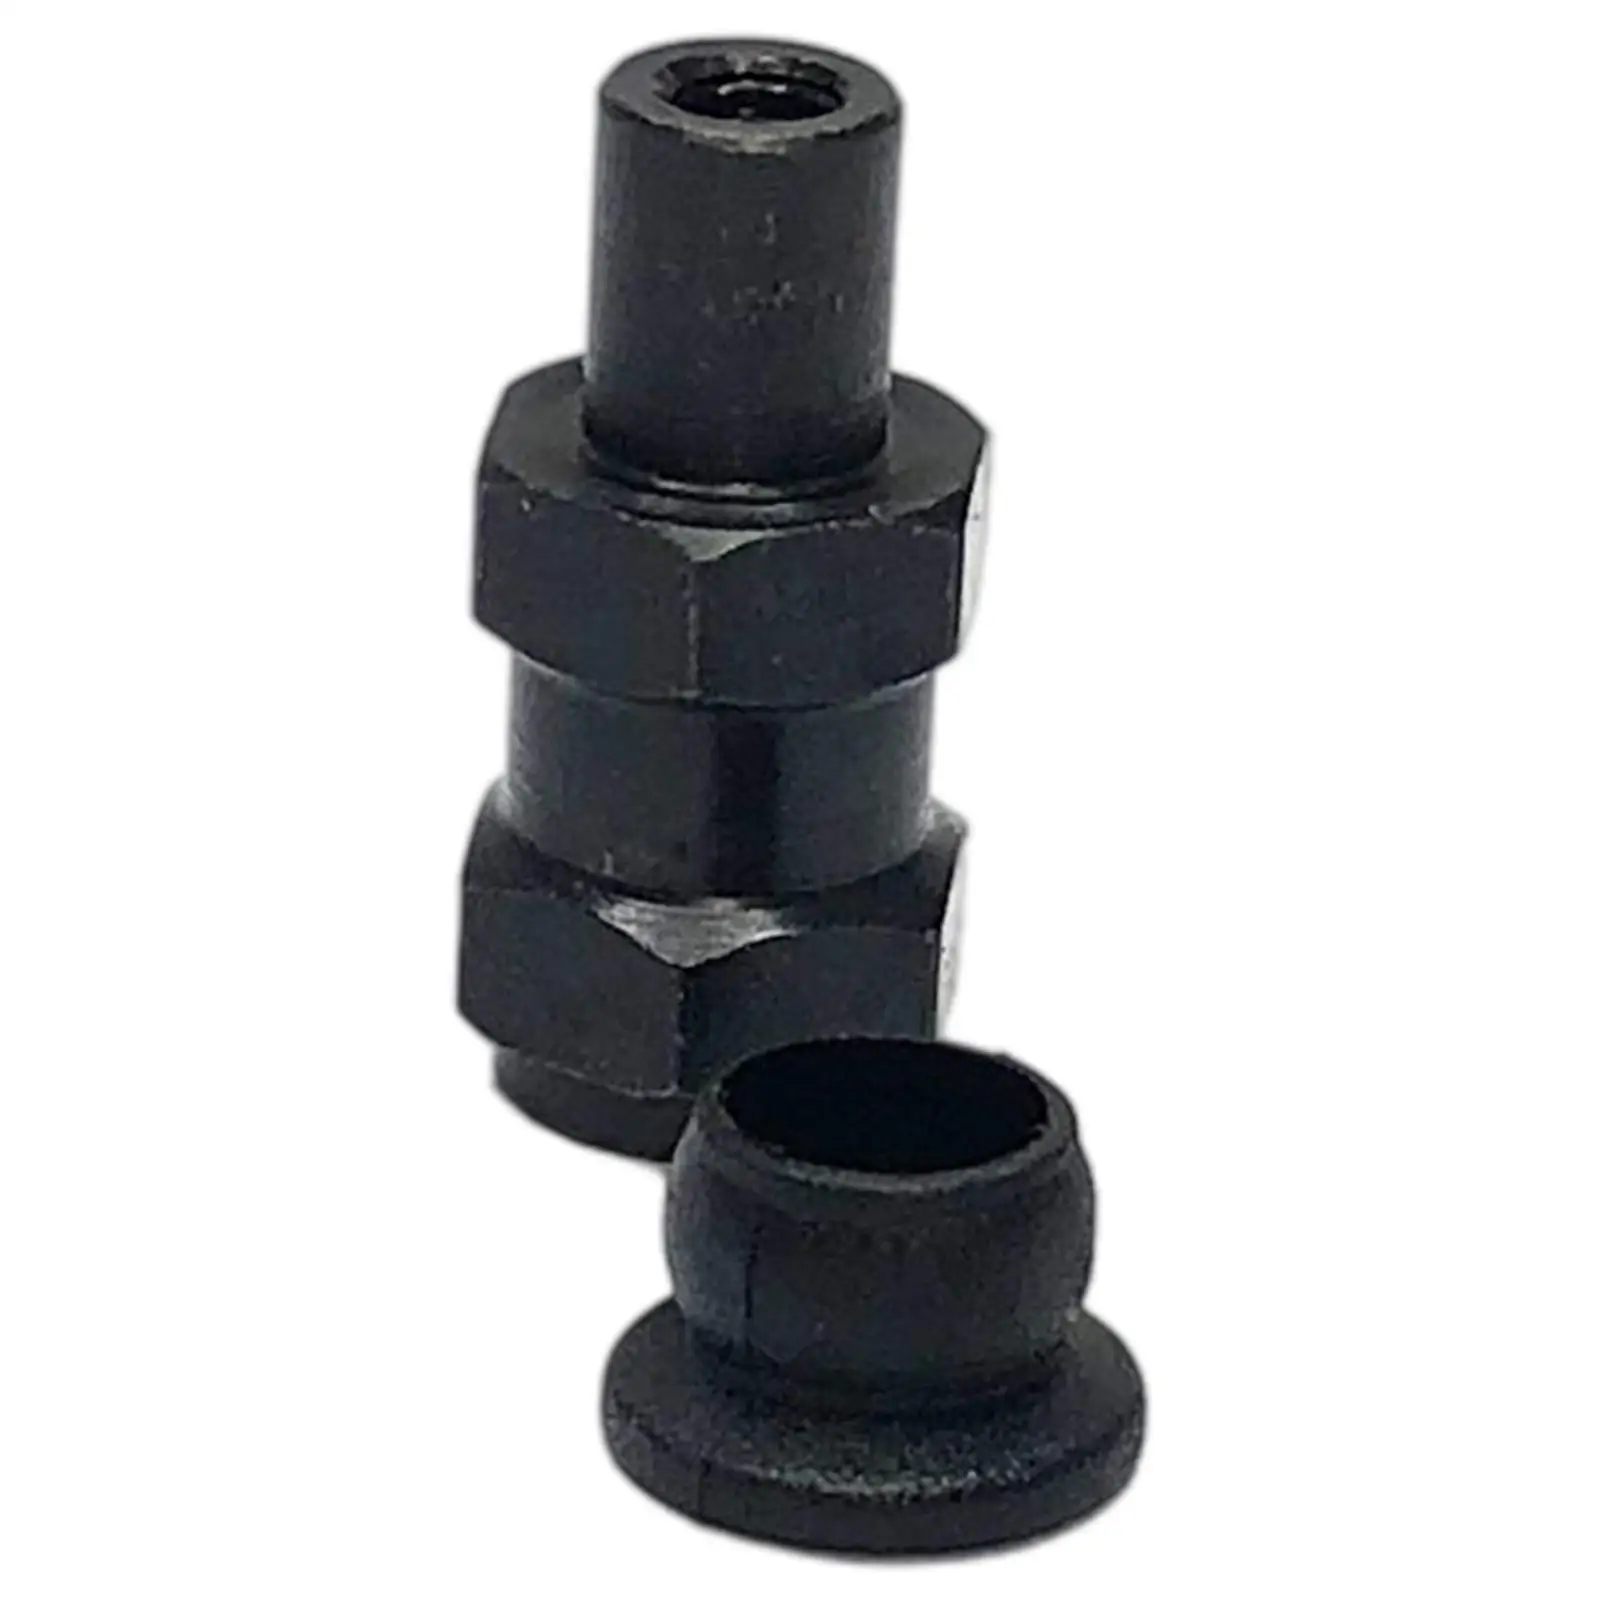 4 Pieces Metal Shock Absorber Bushing 1:8 for ZD Racing 1/8 RC Cars Black